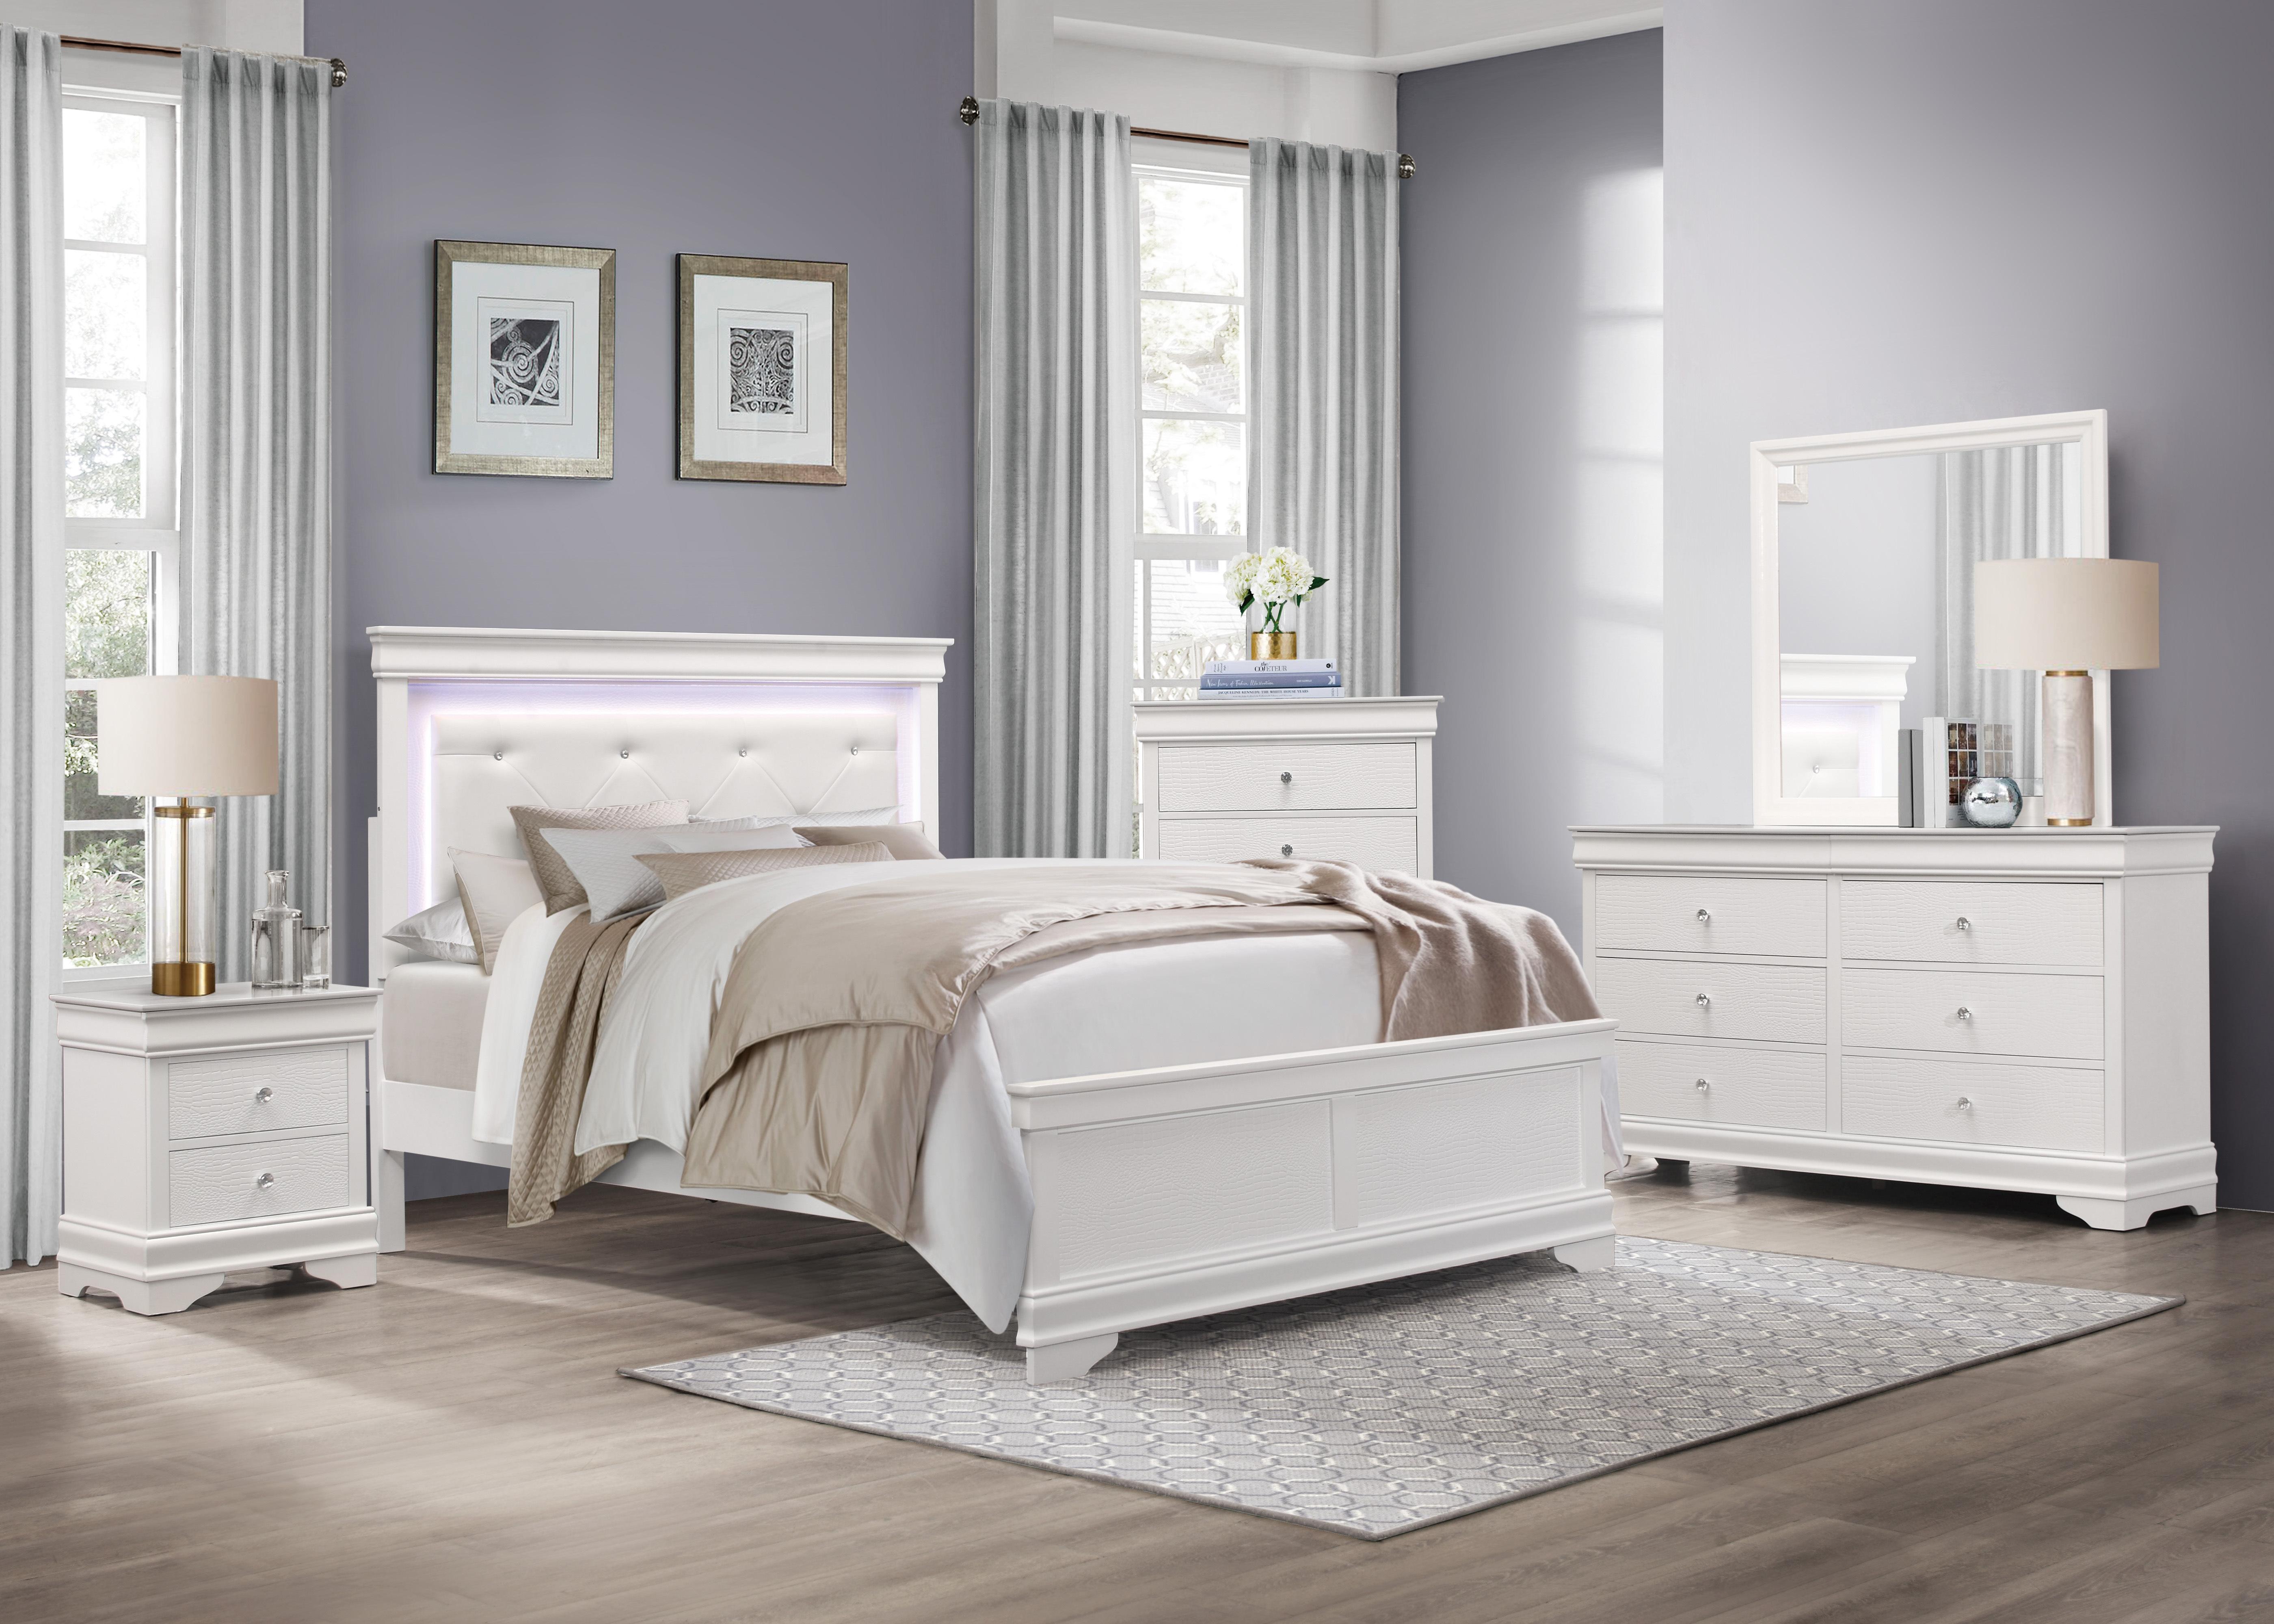 Traditional Bedroom Set 1556W-1-6PC Lana 1556W-1-6PC in White Faux Leather